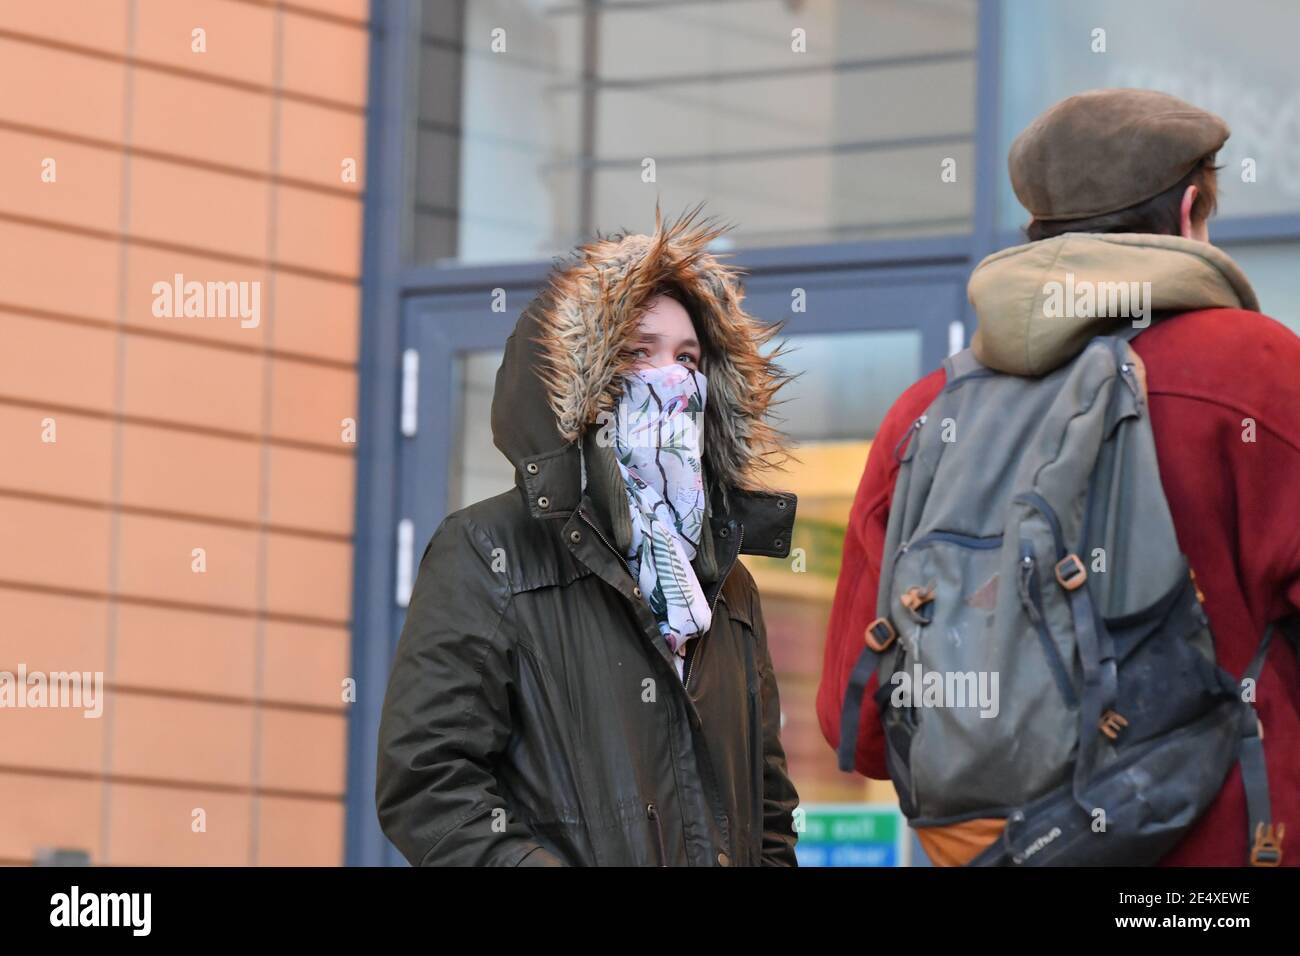 Rhian Graham, 29, arrives at Bristol Magistrates' Court where she and three others are appearing charged with criminal damage over the toppling of the Edward Colston statue in Bristol during the Black Lives Matter protests in June last year. Picture date: Monday January 25, 2021. Stock Photo